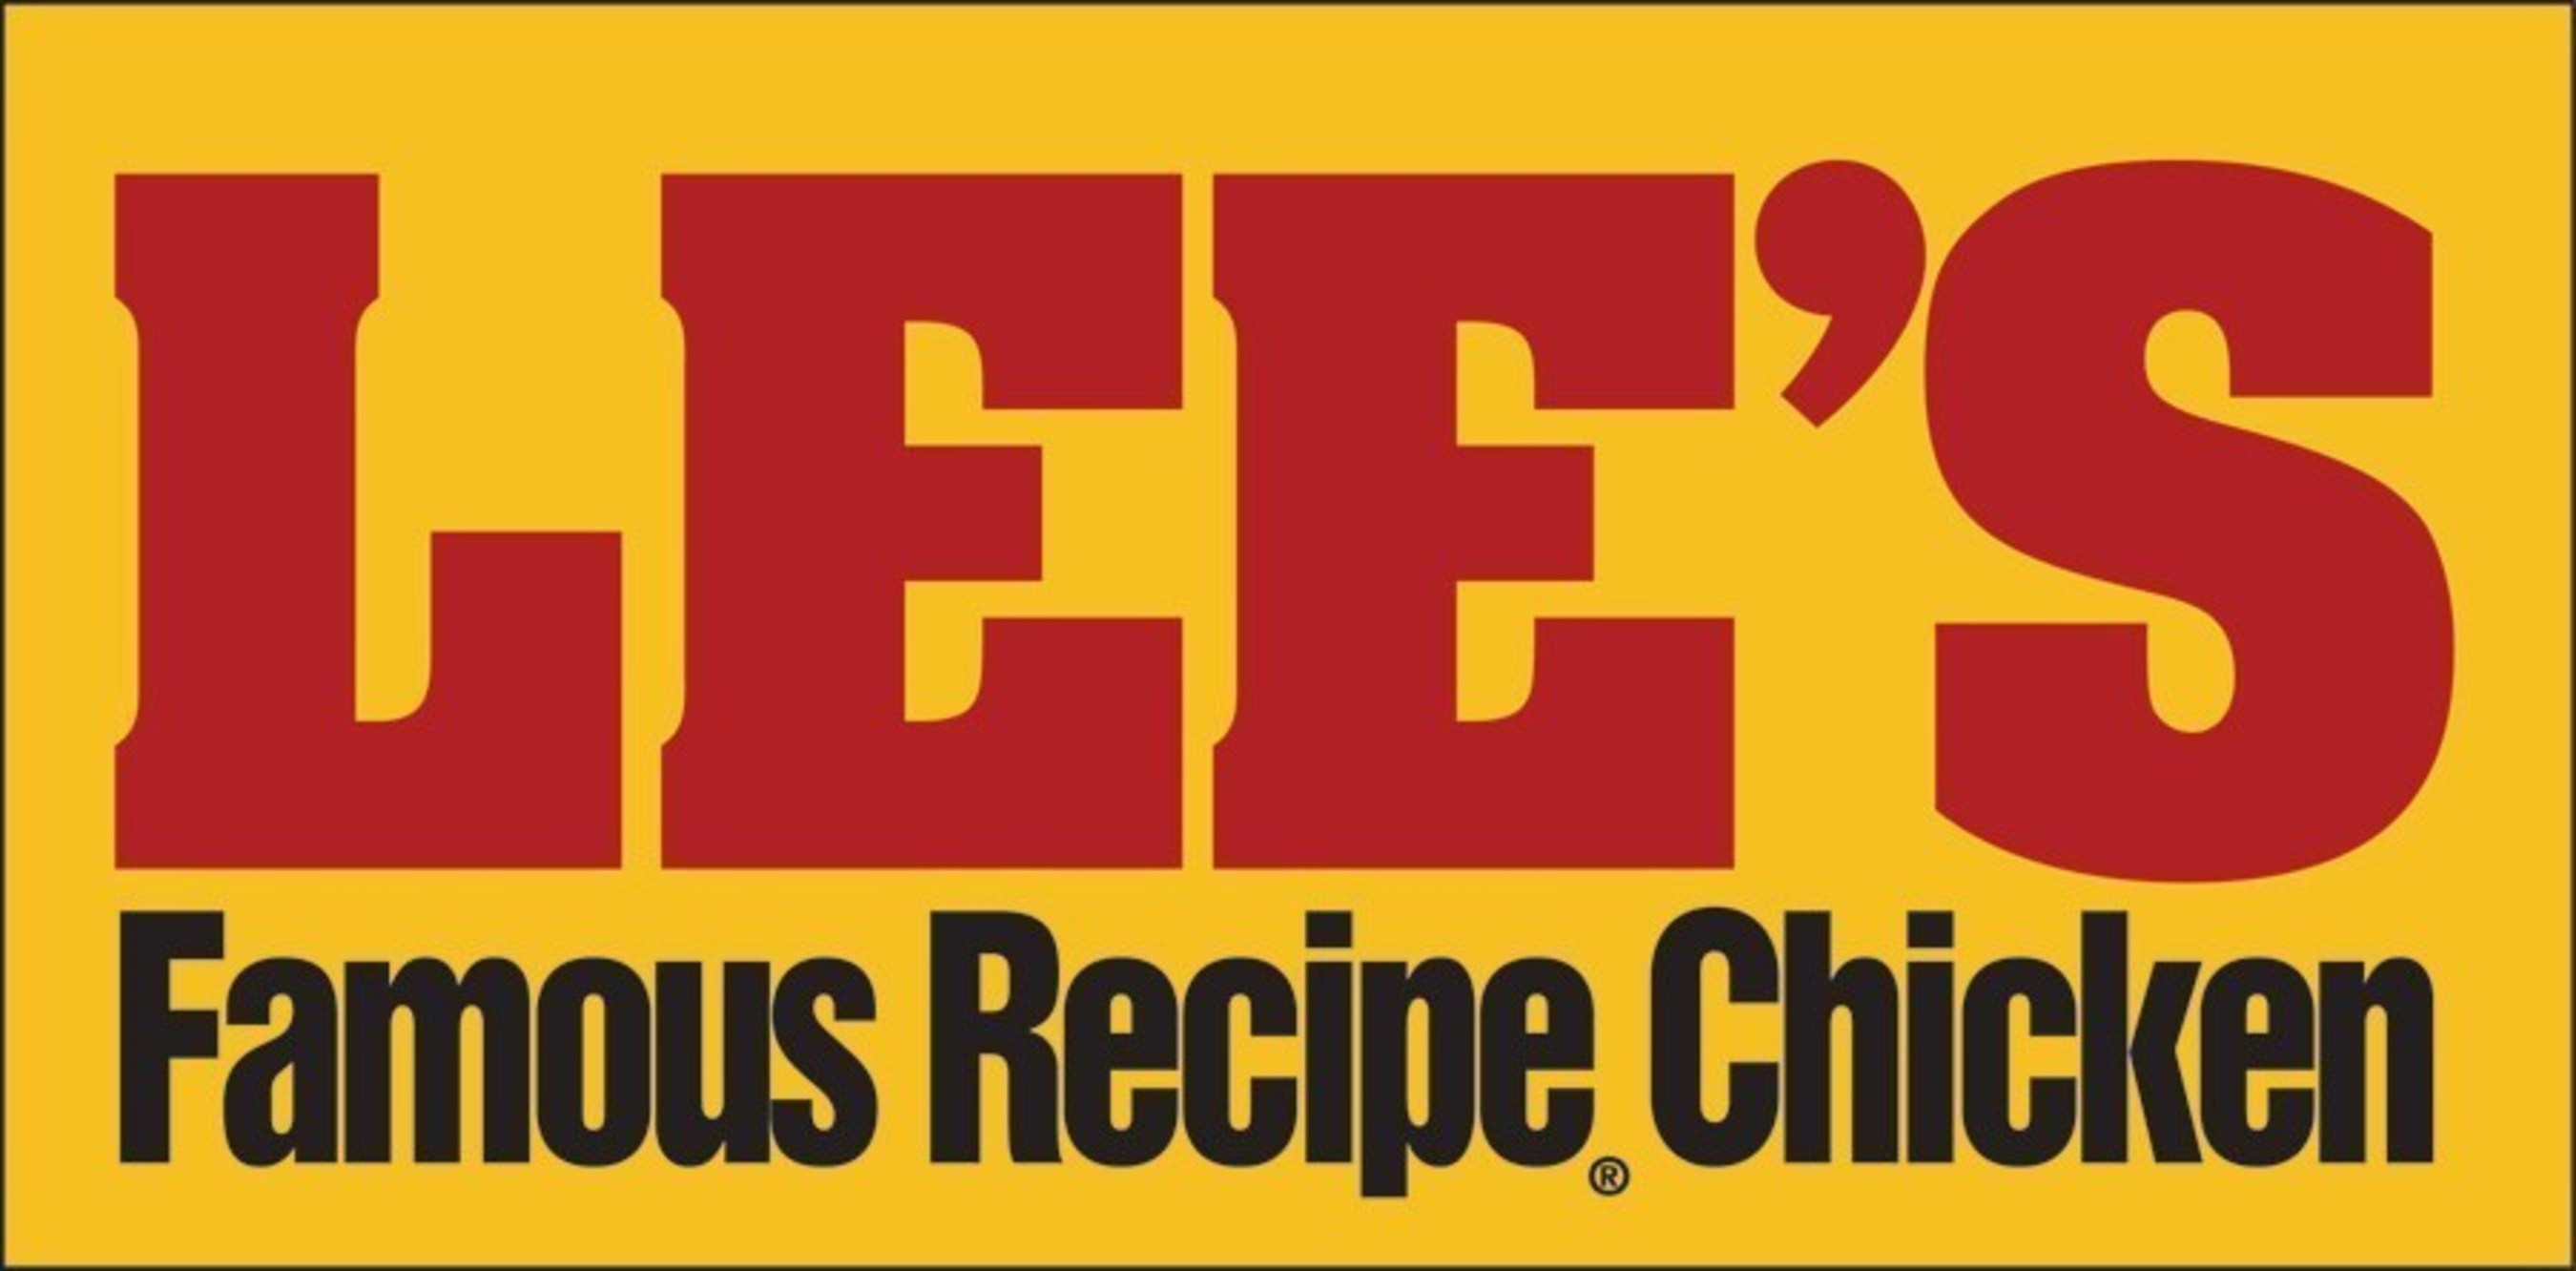 Celebrating 50 years of success, Lee's Famous Recipe® Chicken rewards